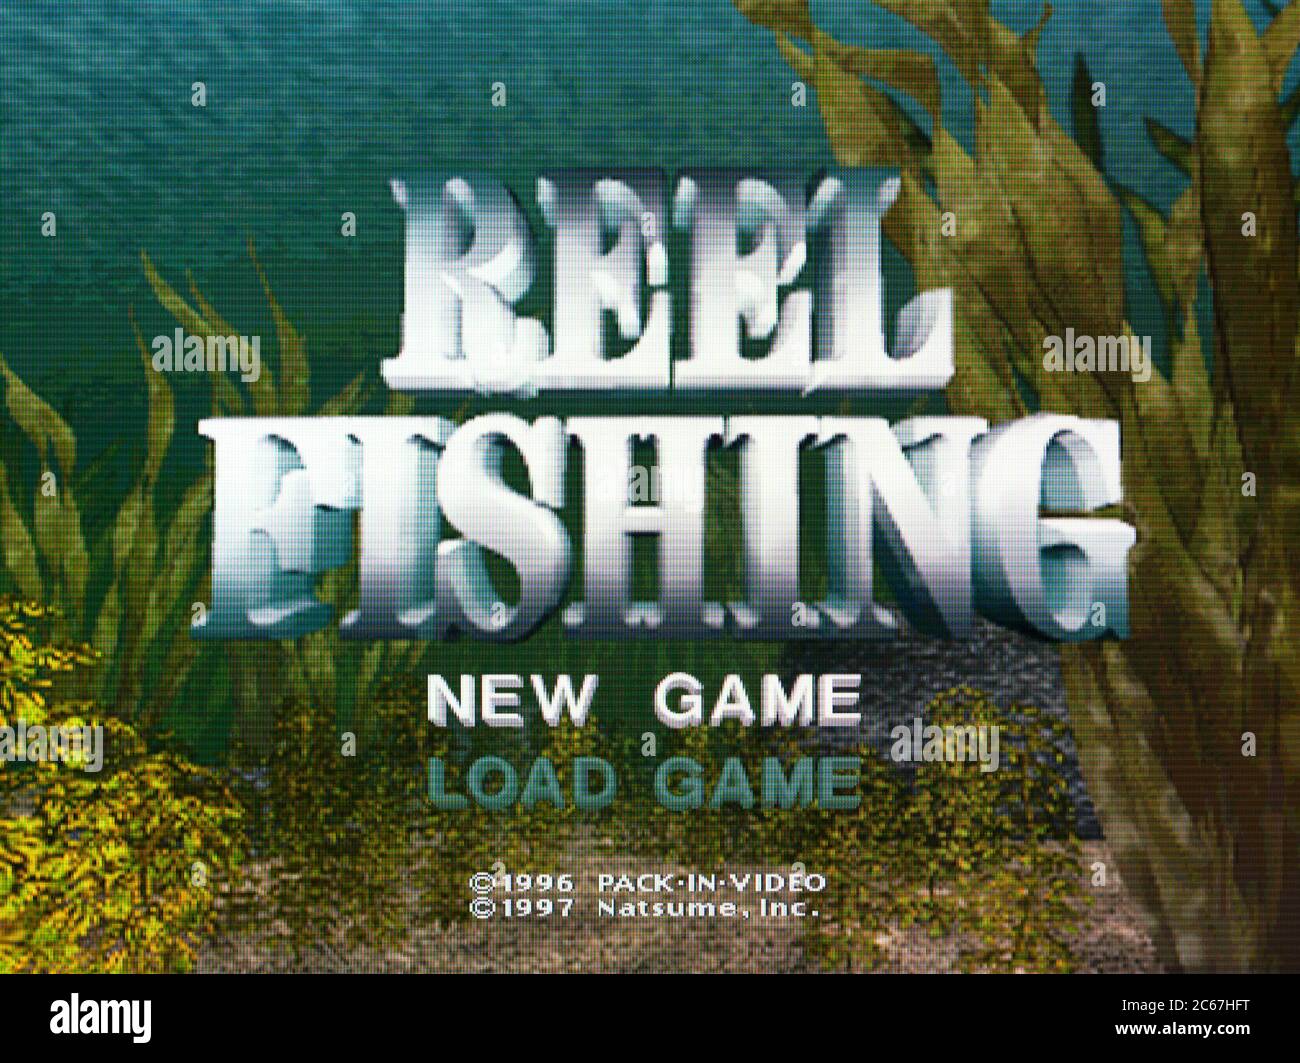 Reel Fishing - Sony Playstation 1 PS1 PSX - Editorial use only